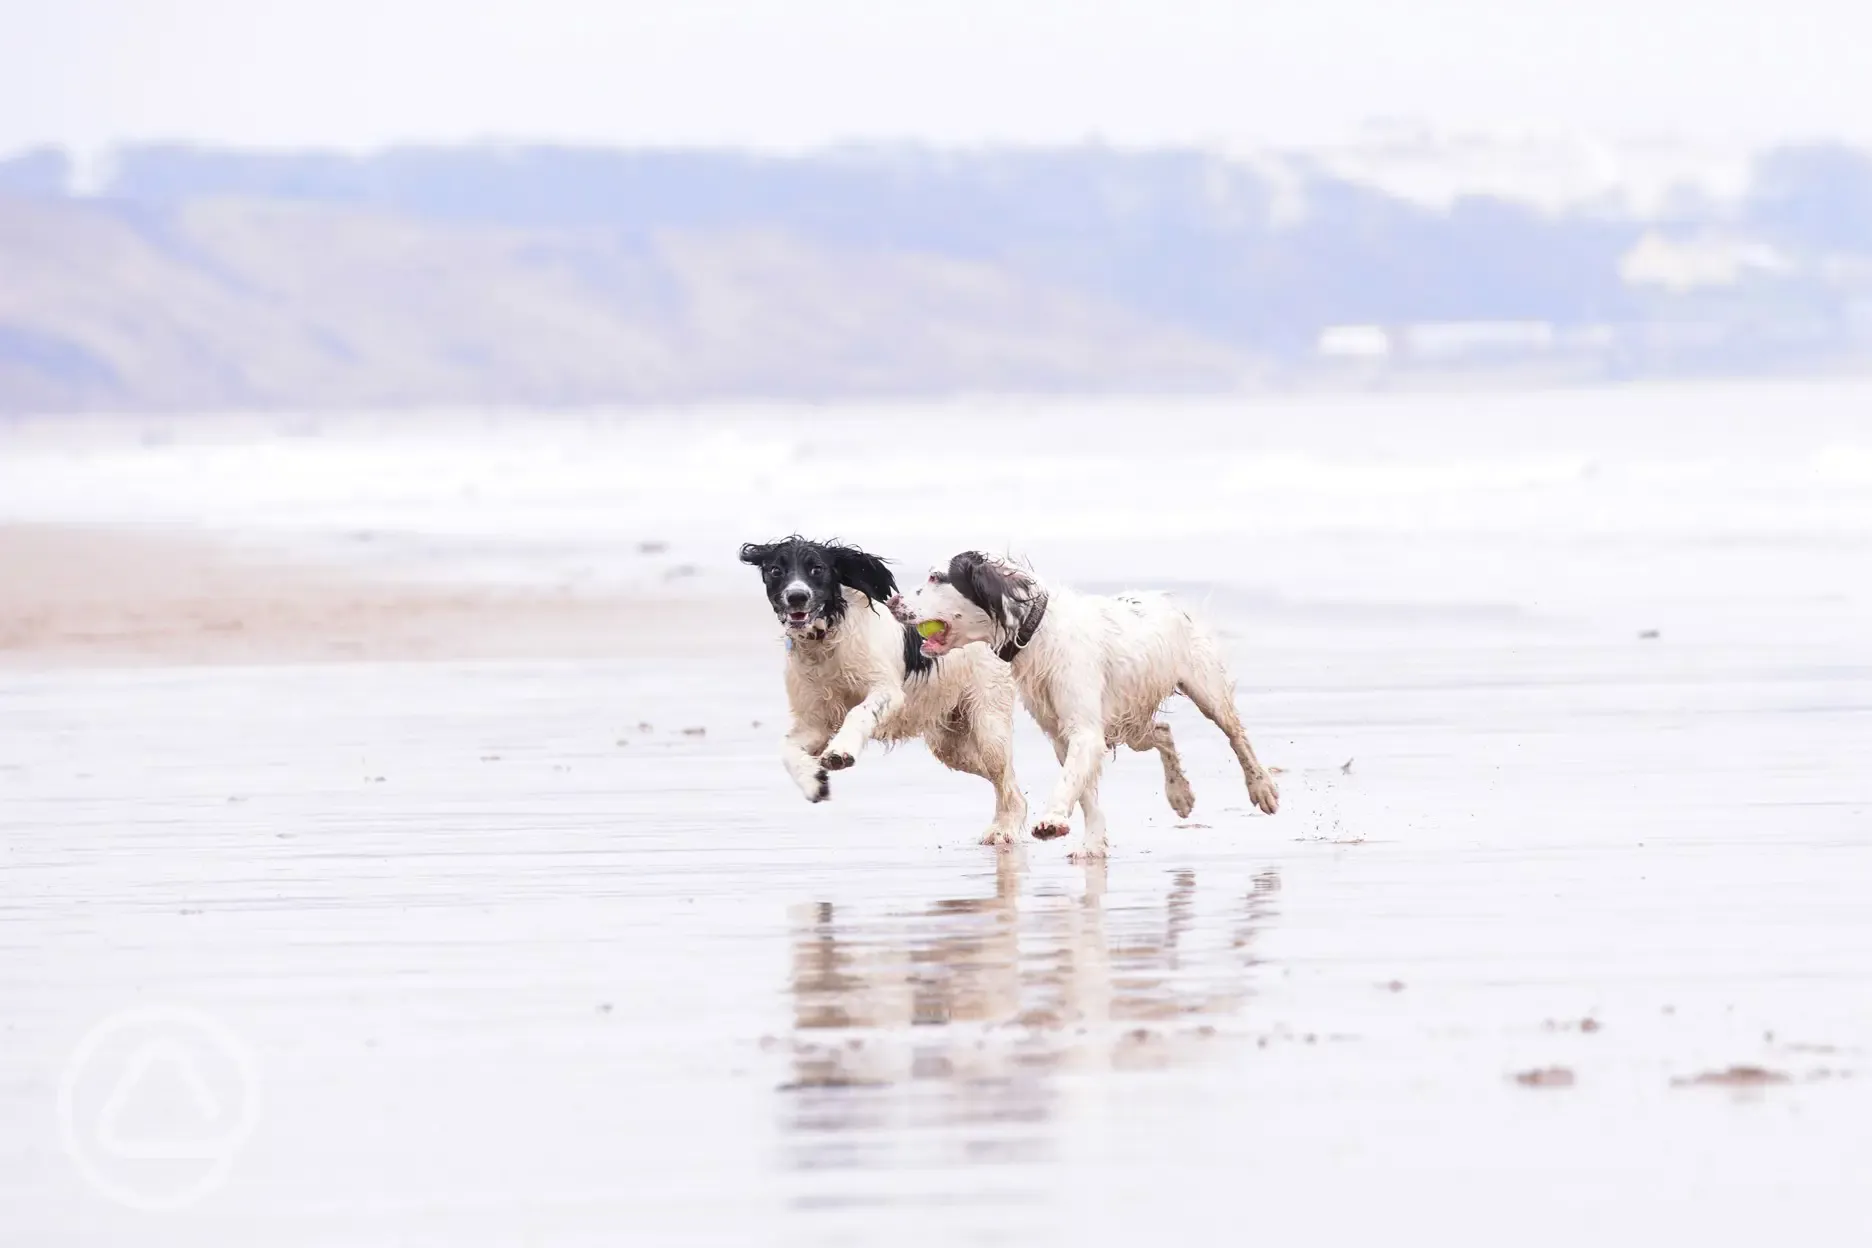 Our local dog friendly beach is just 20 minutes away